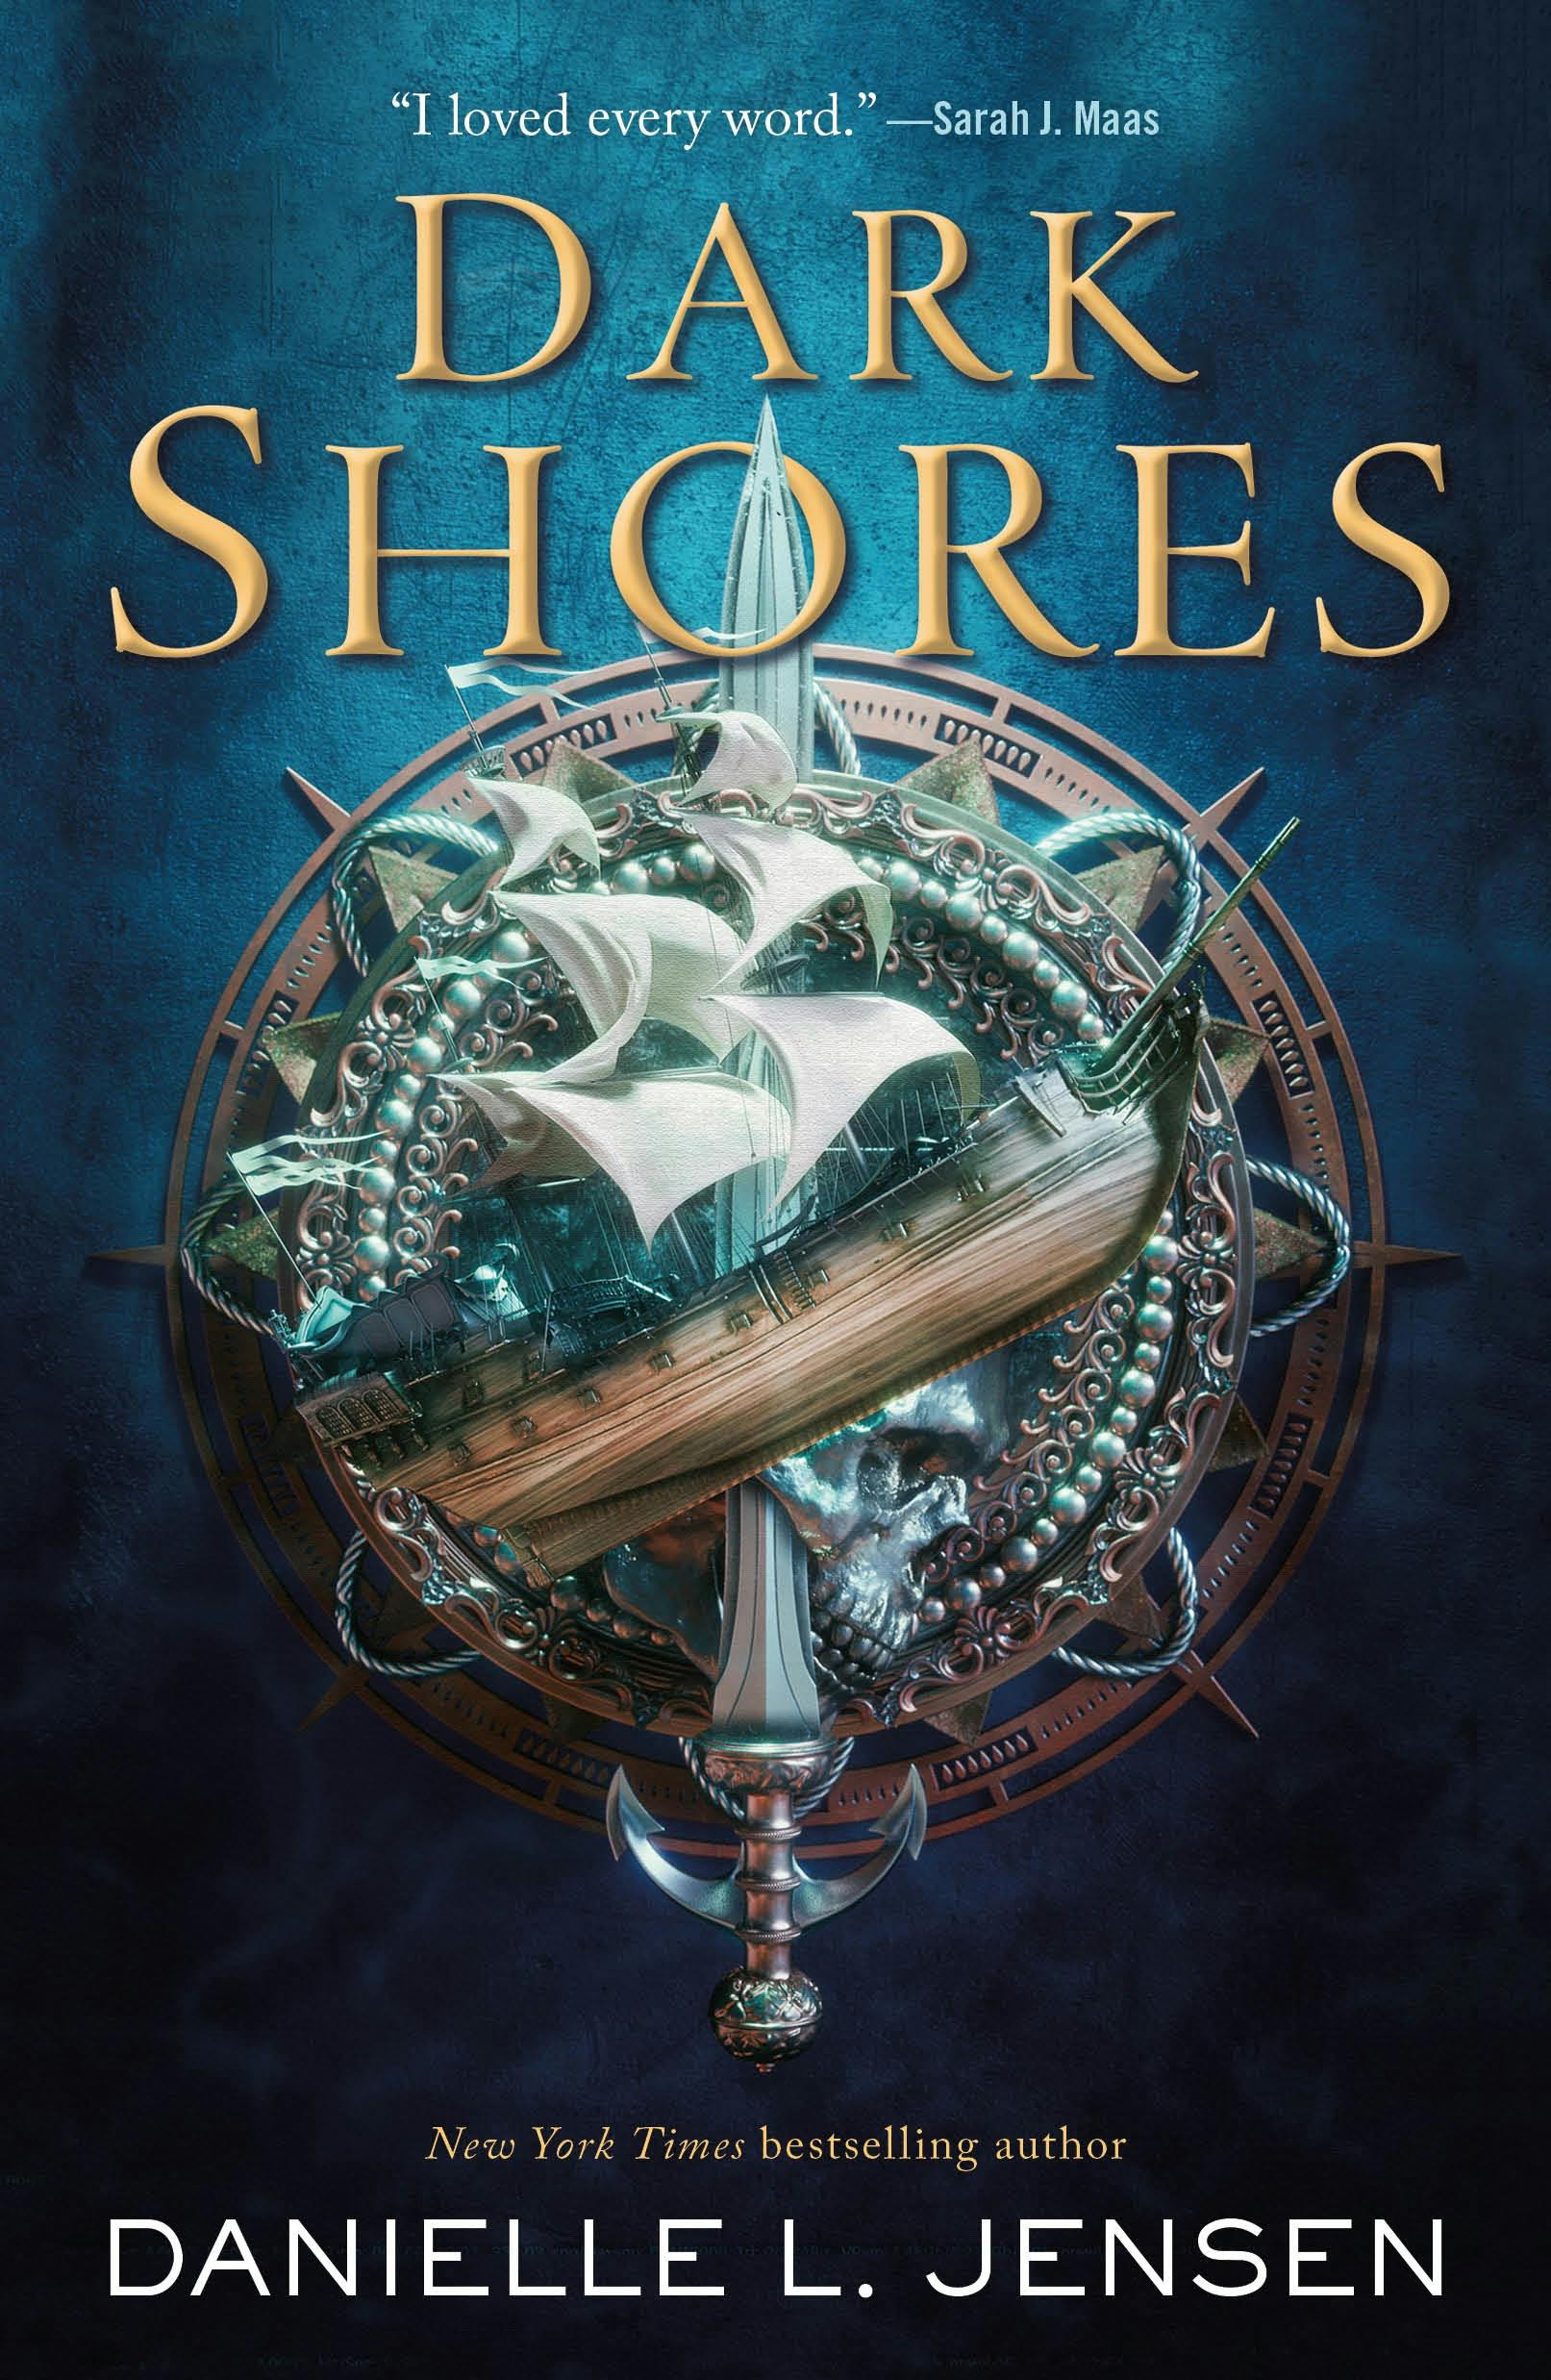 Cover for the book titled as: Dark Shores